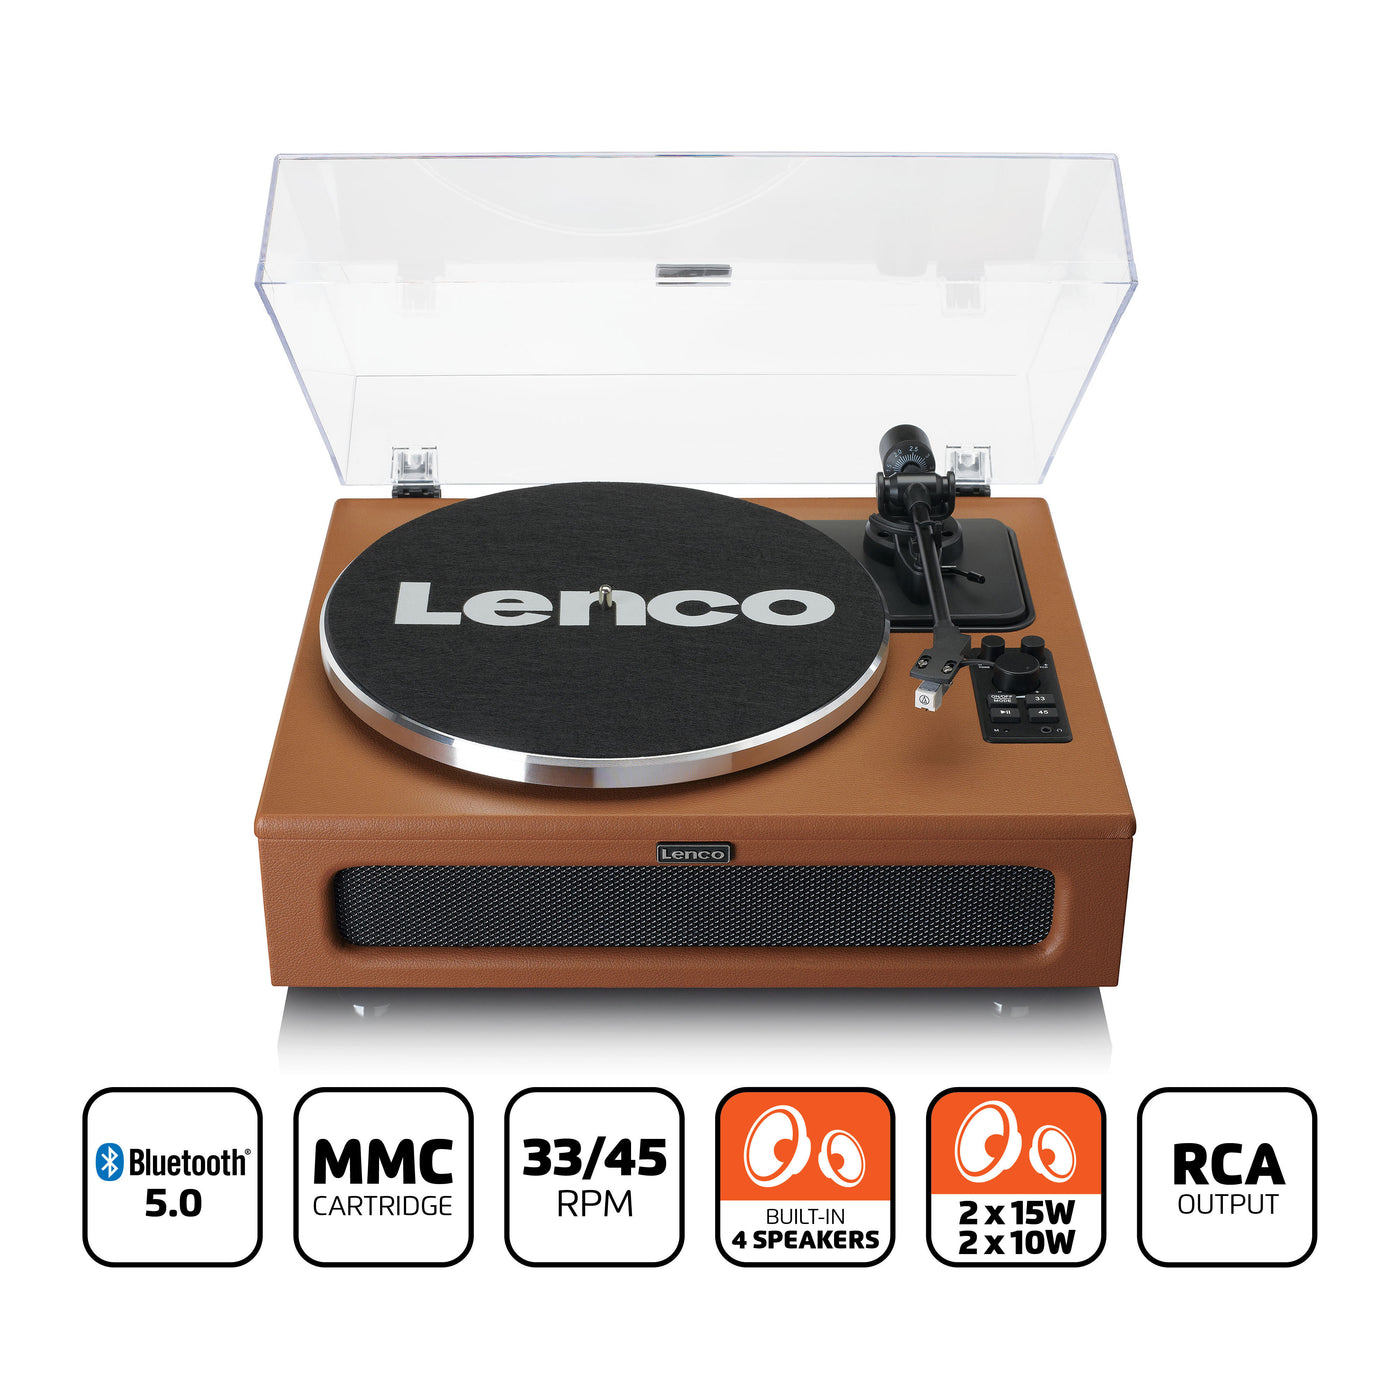 LENCO LS-430BN - Turntable with 4 built-in speakers - Brown